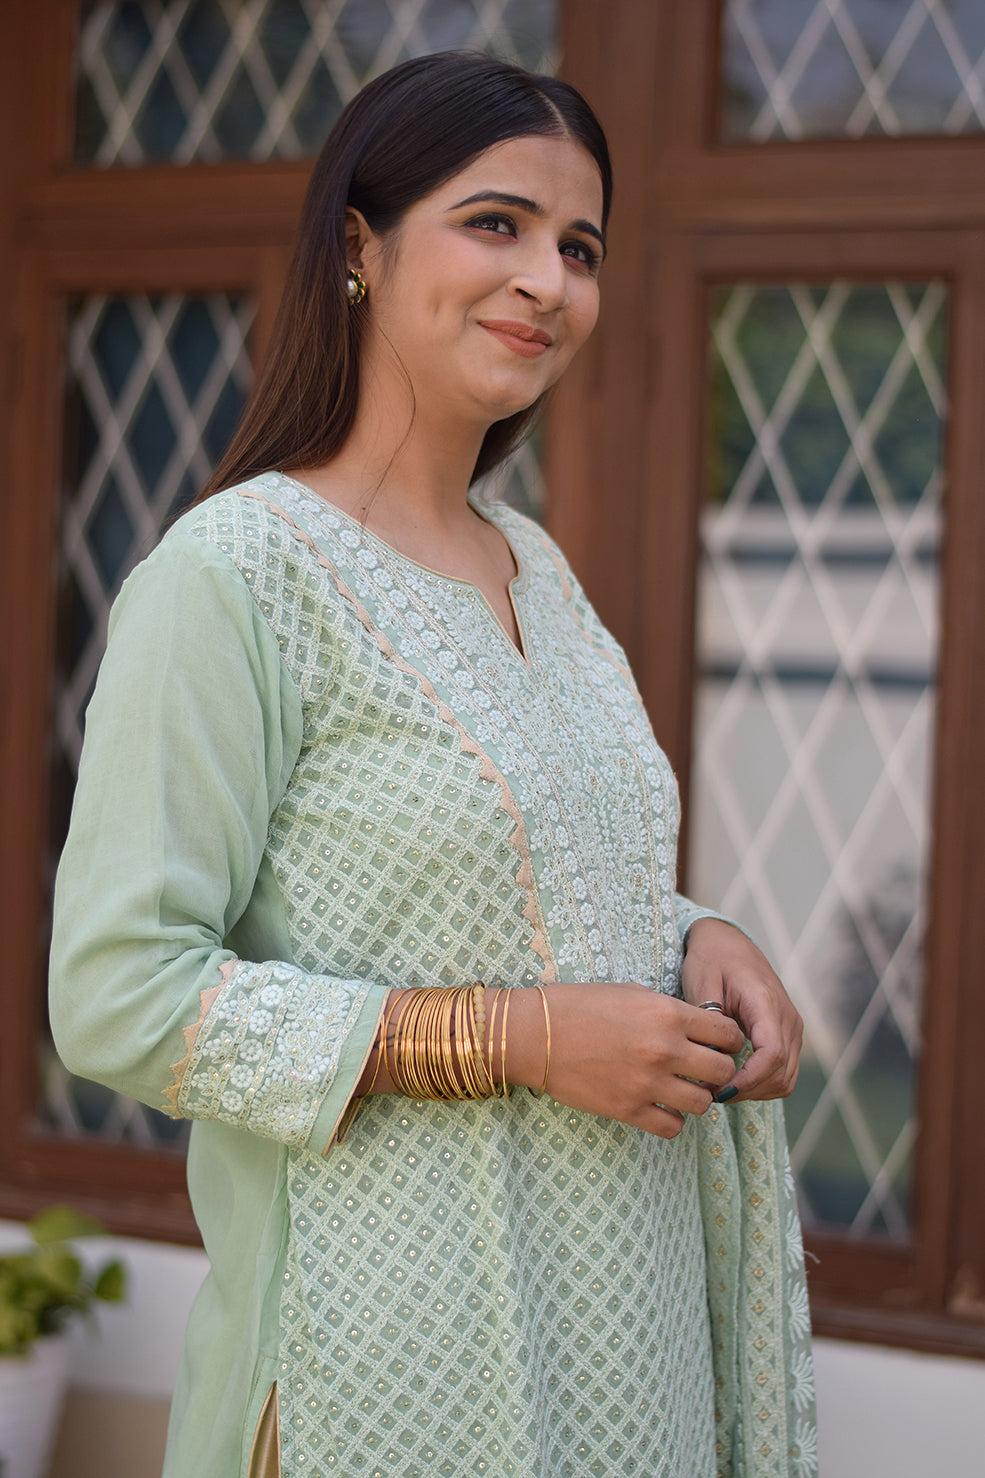 A solo female dressed in an exquisite green chikankari kurta set, highlighting traditional Indian fashion.